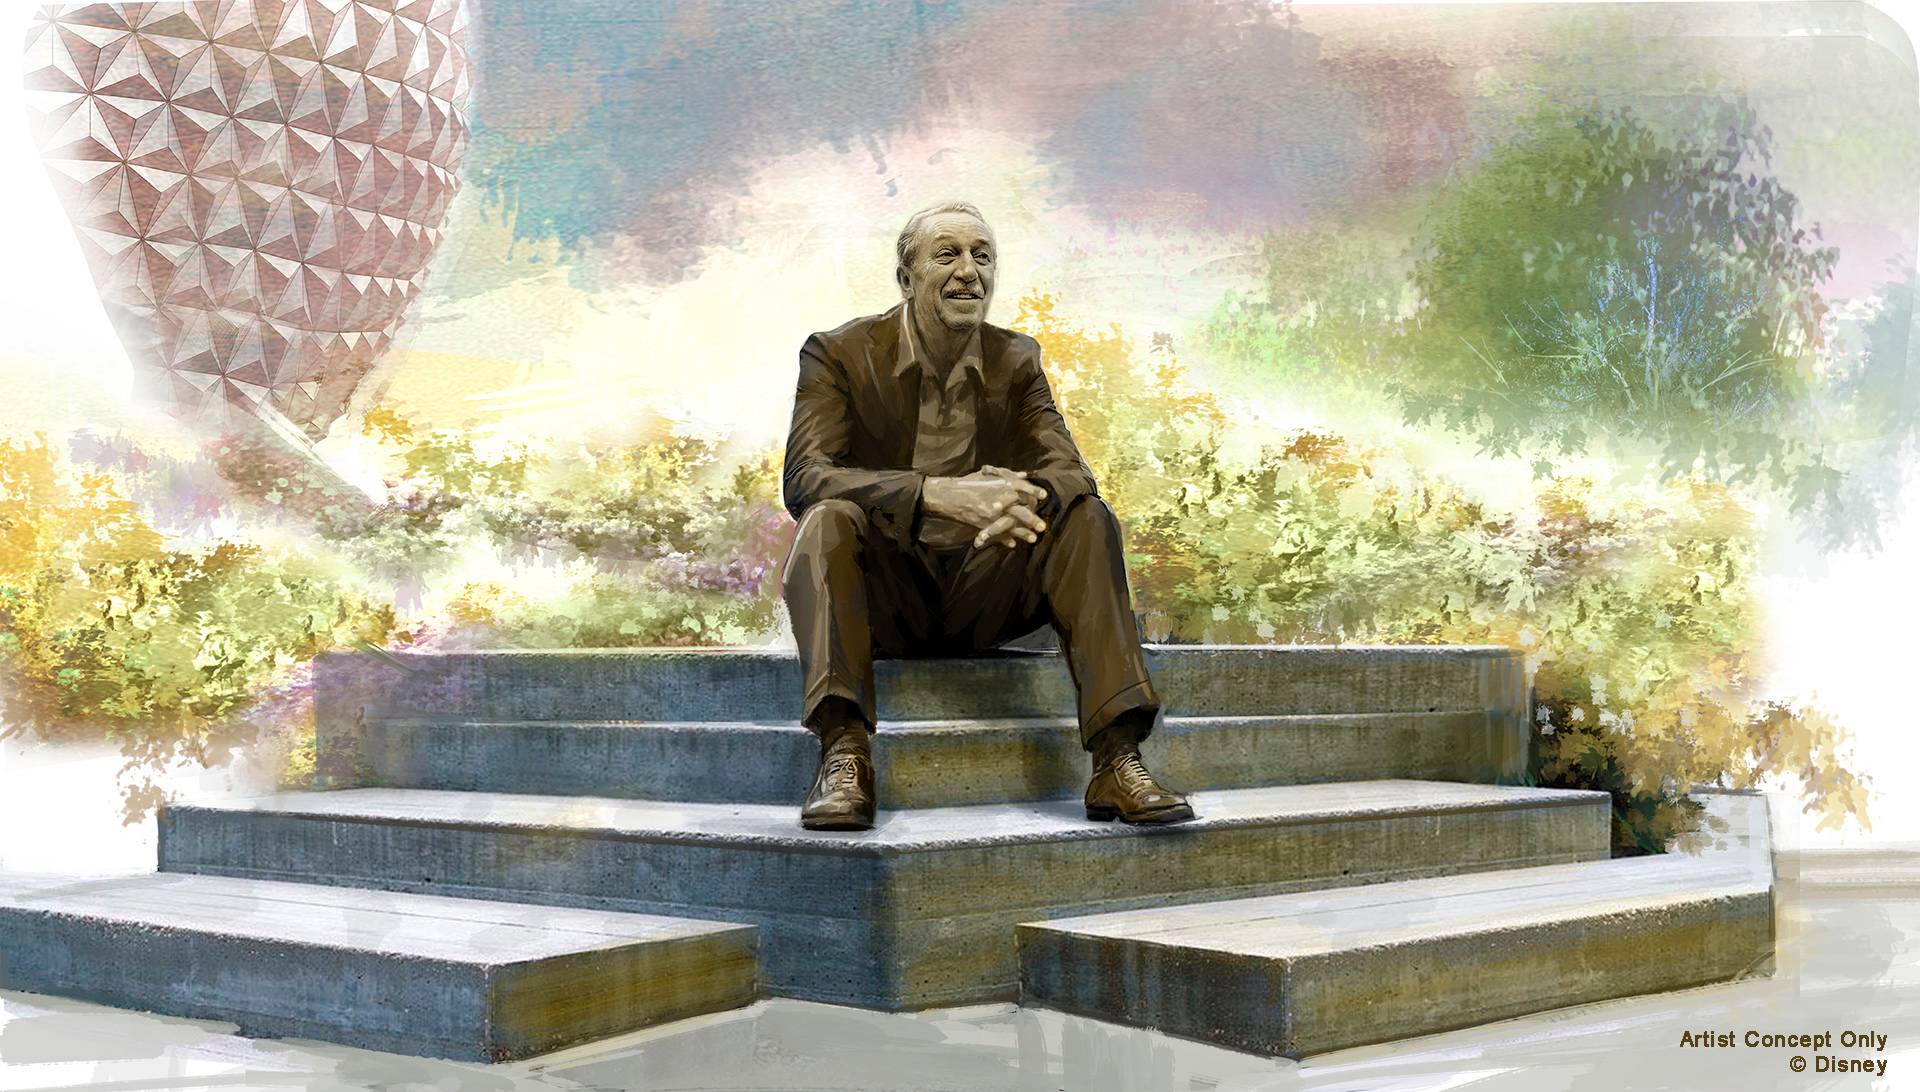 PHOTO - Concept art showing the statue of Walt Disney that will be part of Dreamer's Point in EPCOT